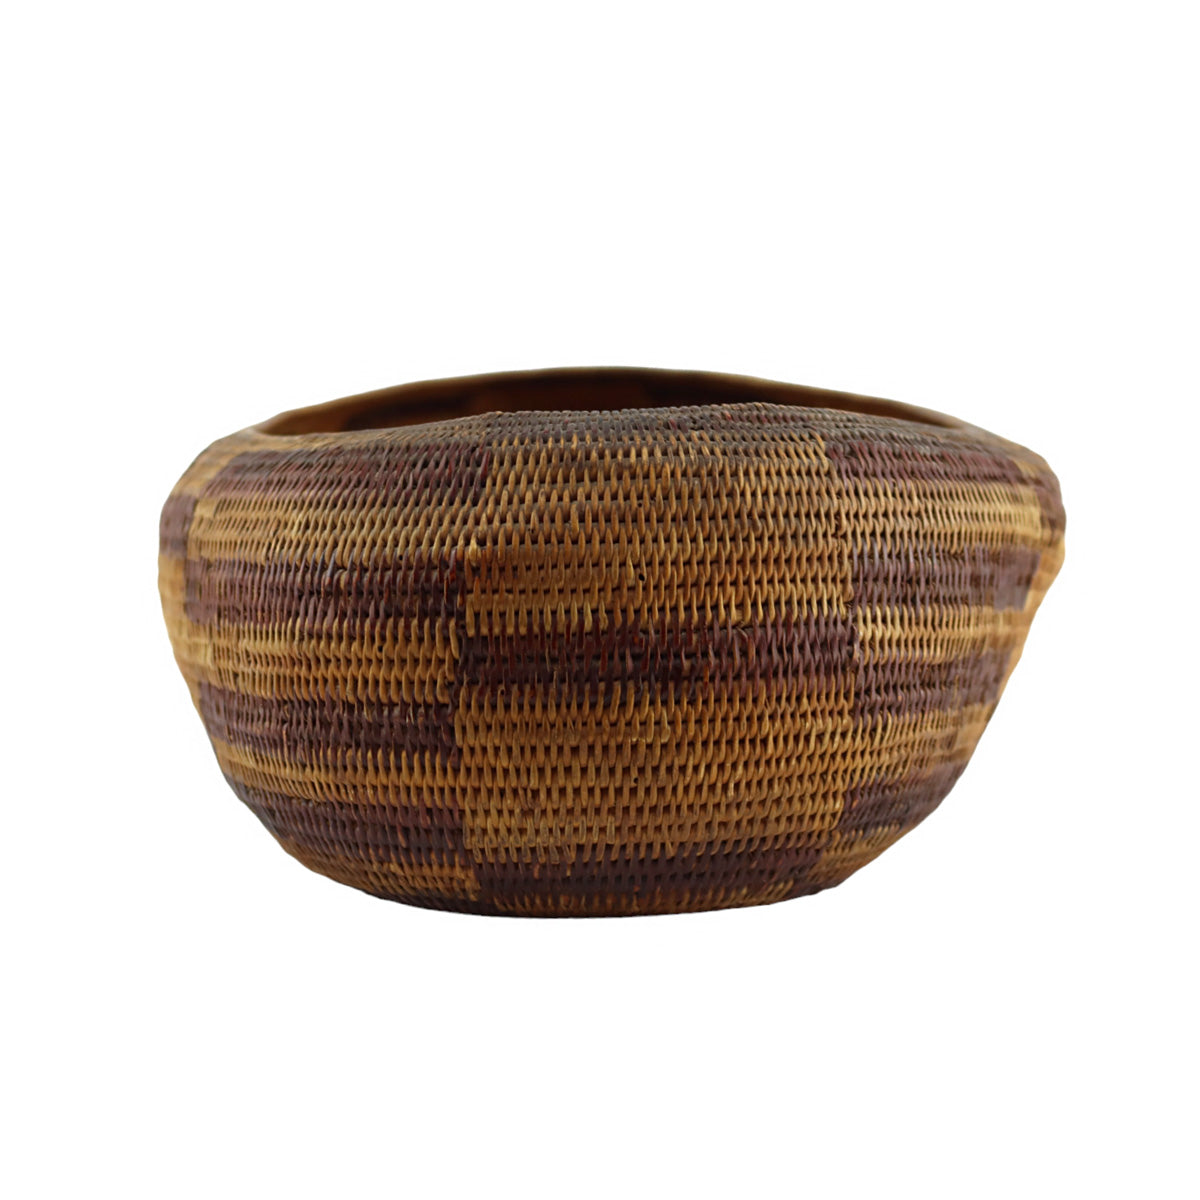 Pomo Oval Basket with Checkered Design c. 1890s, 4" x 16.5" x 9.25" (SK90257C-1223-001)